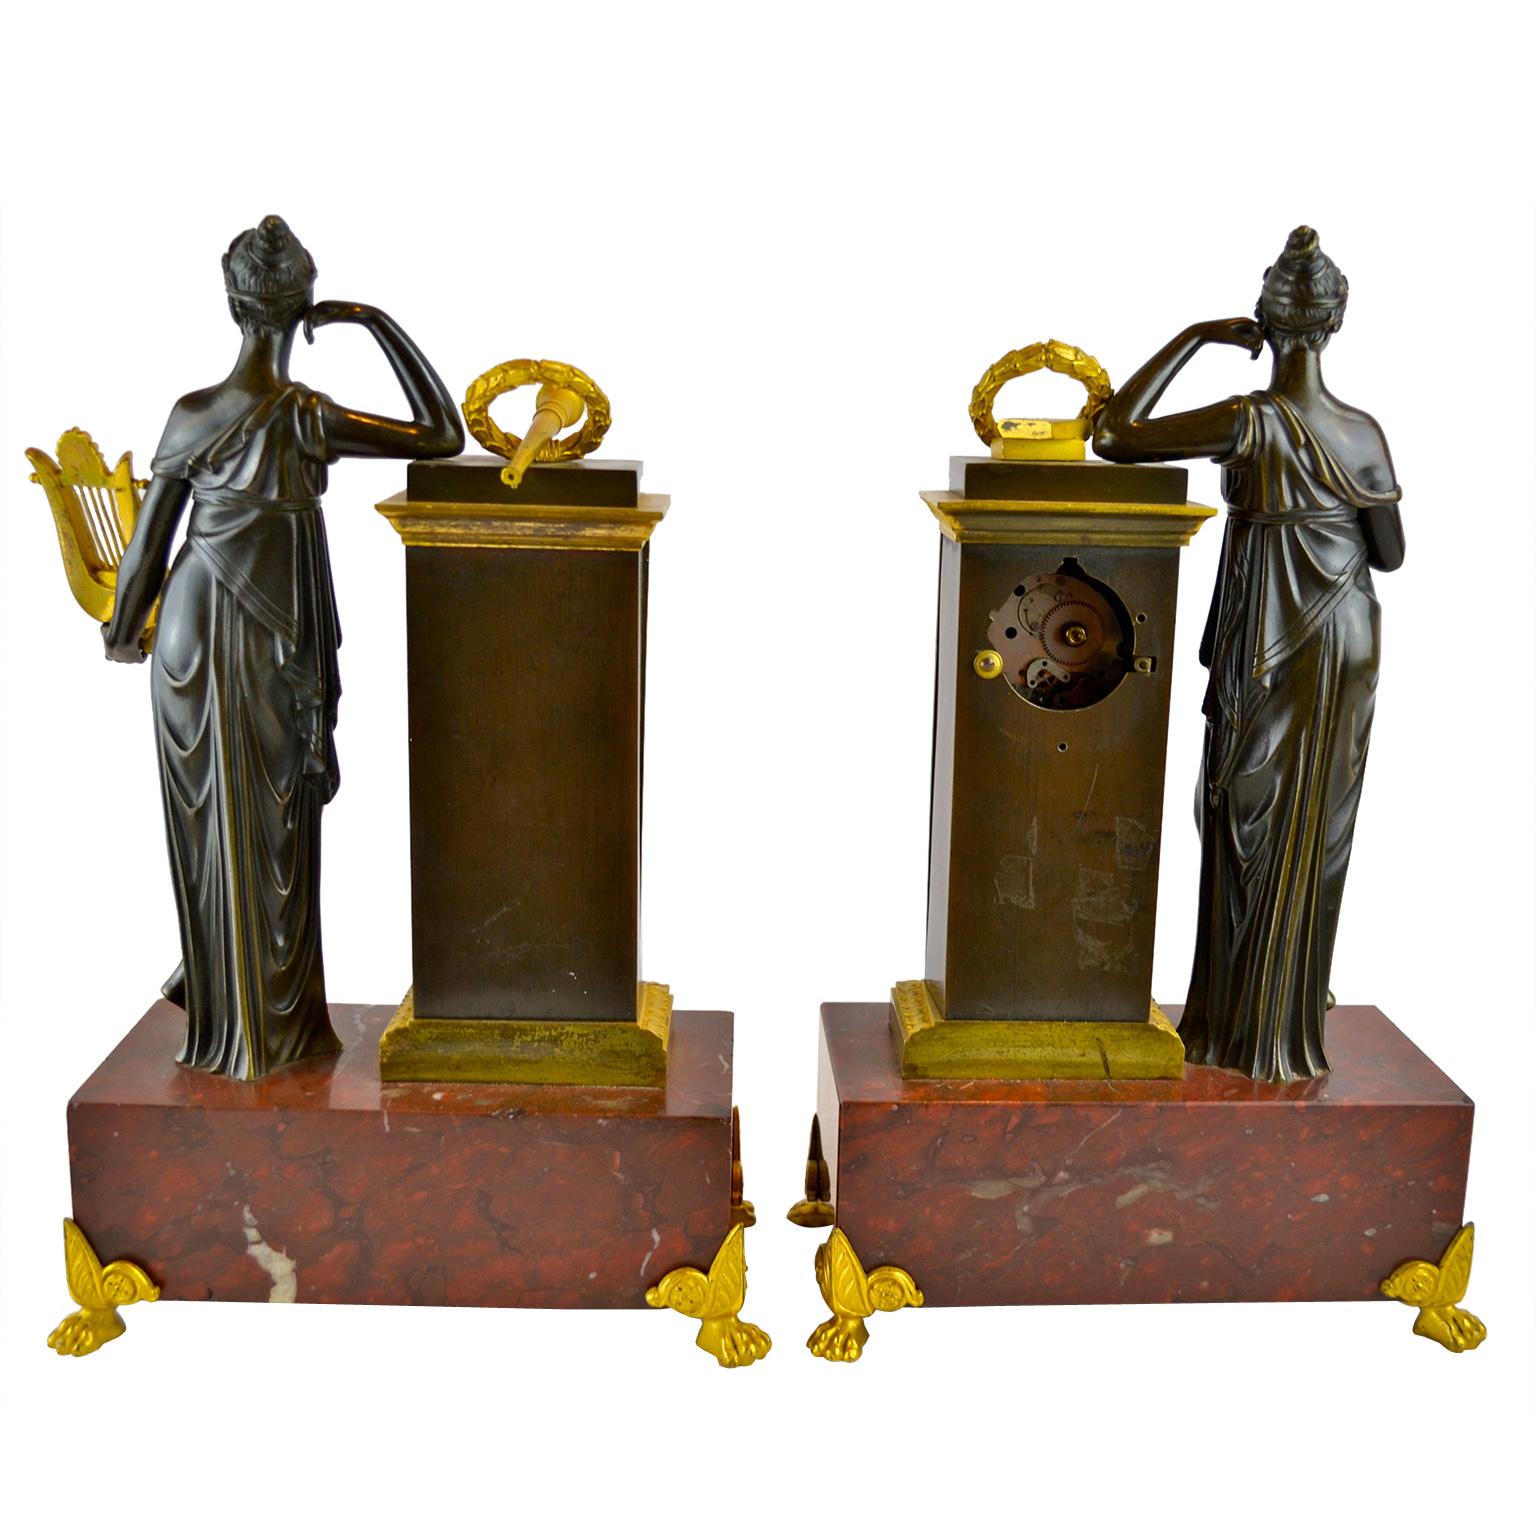 19th Century  Rare French Empire Marble and Patinated Bronze Clock and Barometer Desk Set